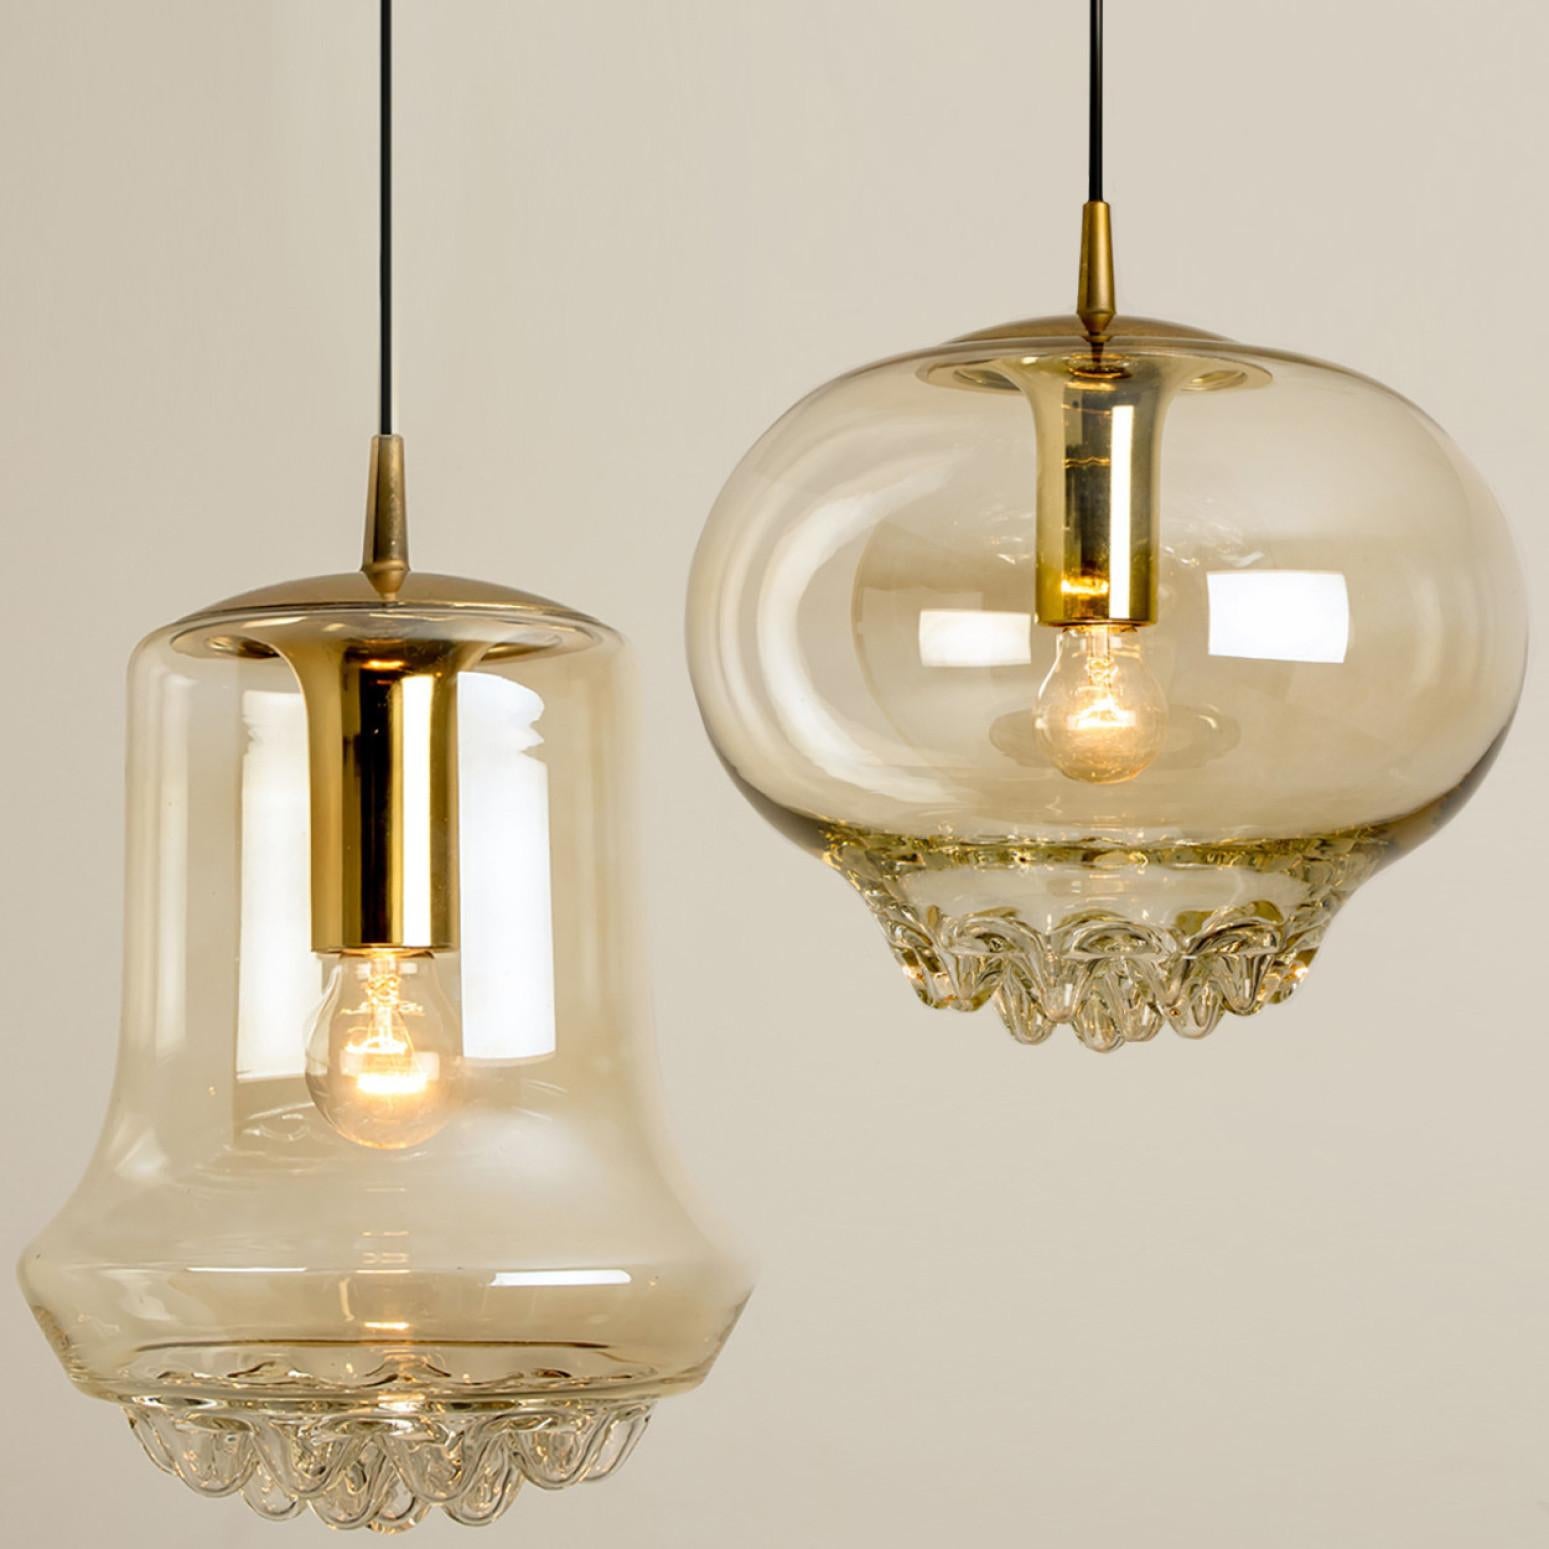 Set of two smoked golden/brown pendant lights, 1960s by Peill and Putzler in Germany, Europe. A unique shape and a wonderful light effect due to lovely glass elements. High quality pieces. Illuminates beautiful. True craftsmanship of the 20th